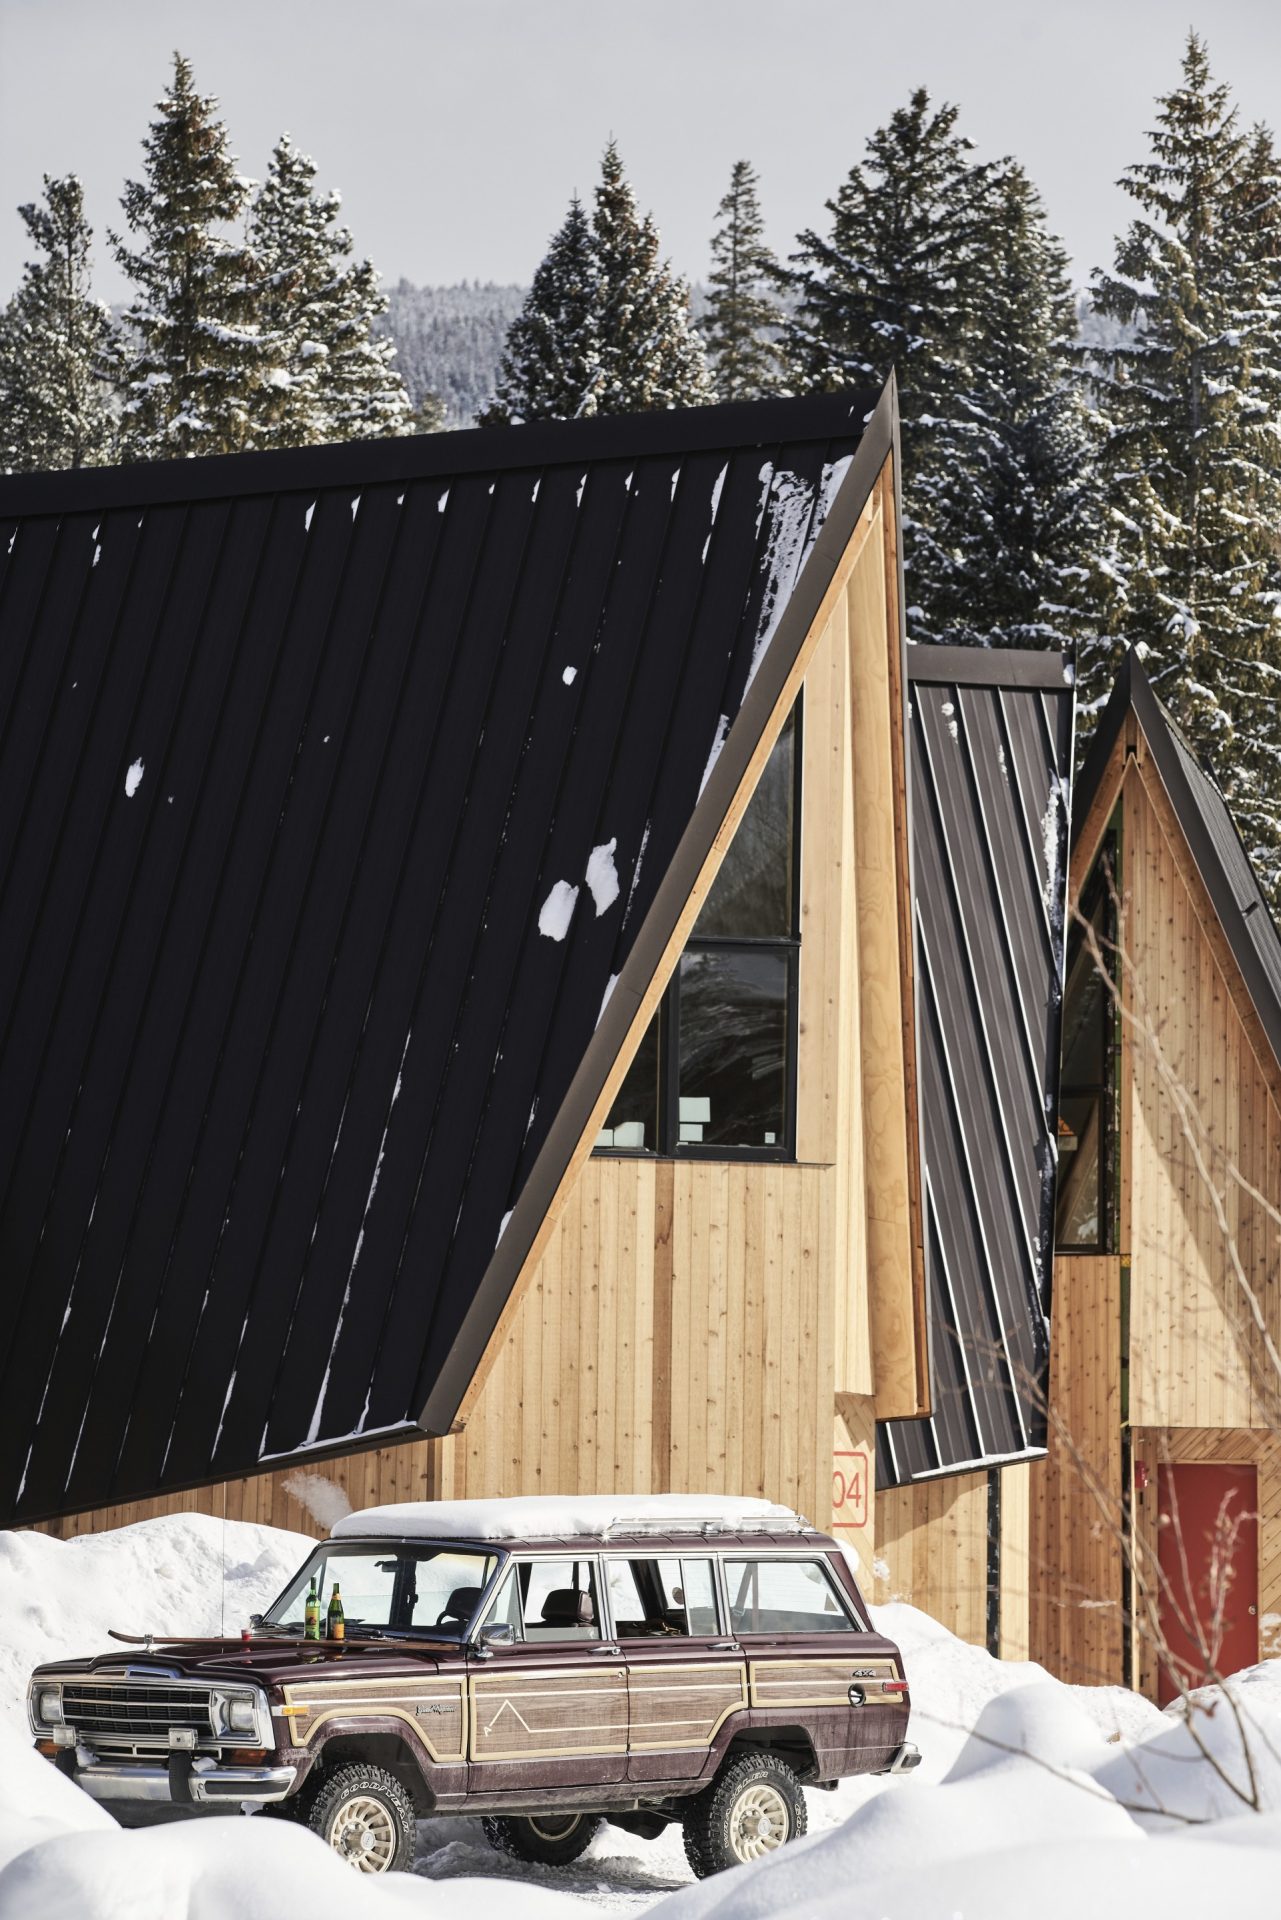 The A-Frame Club is located at the base of the Winter Park Resort and borders the Fraser River. Photo credit: A-Frame Club